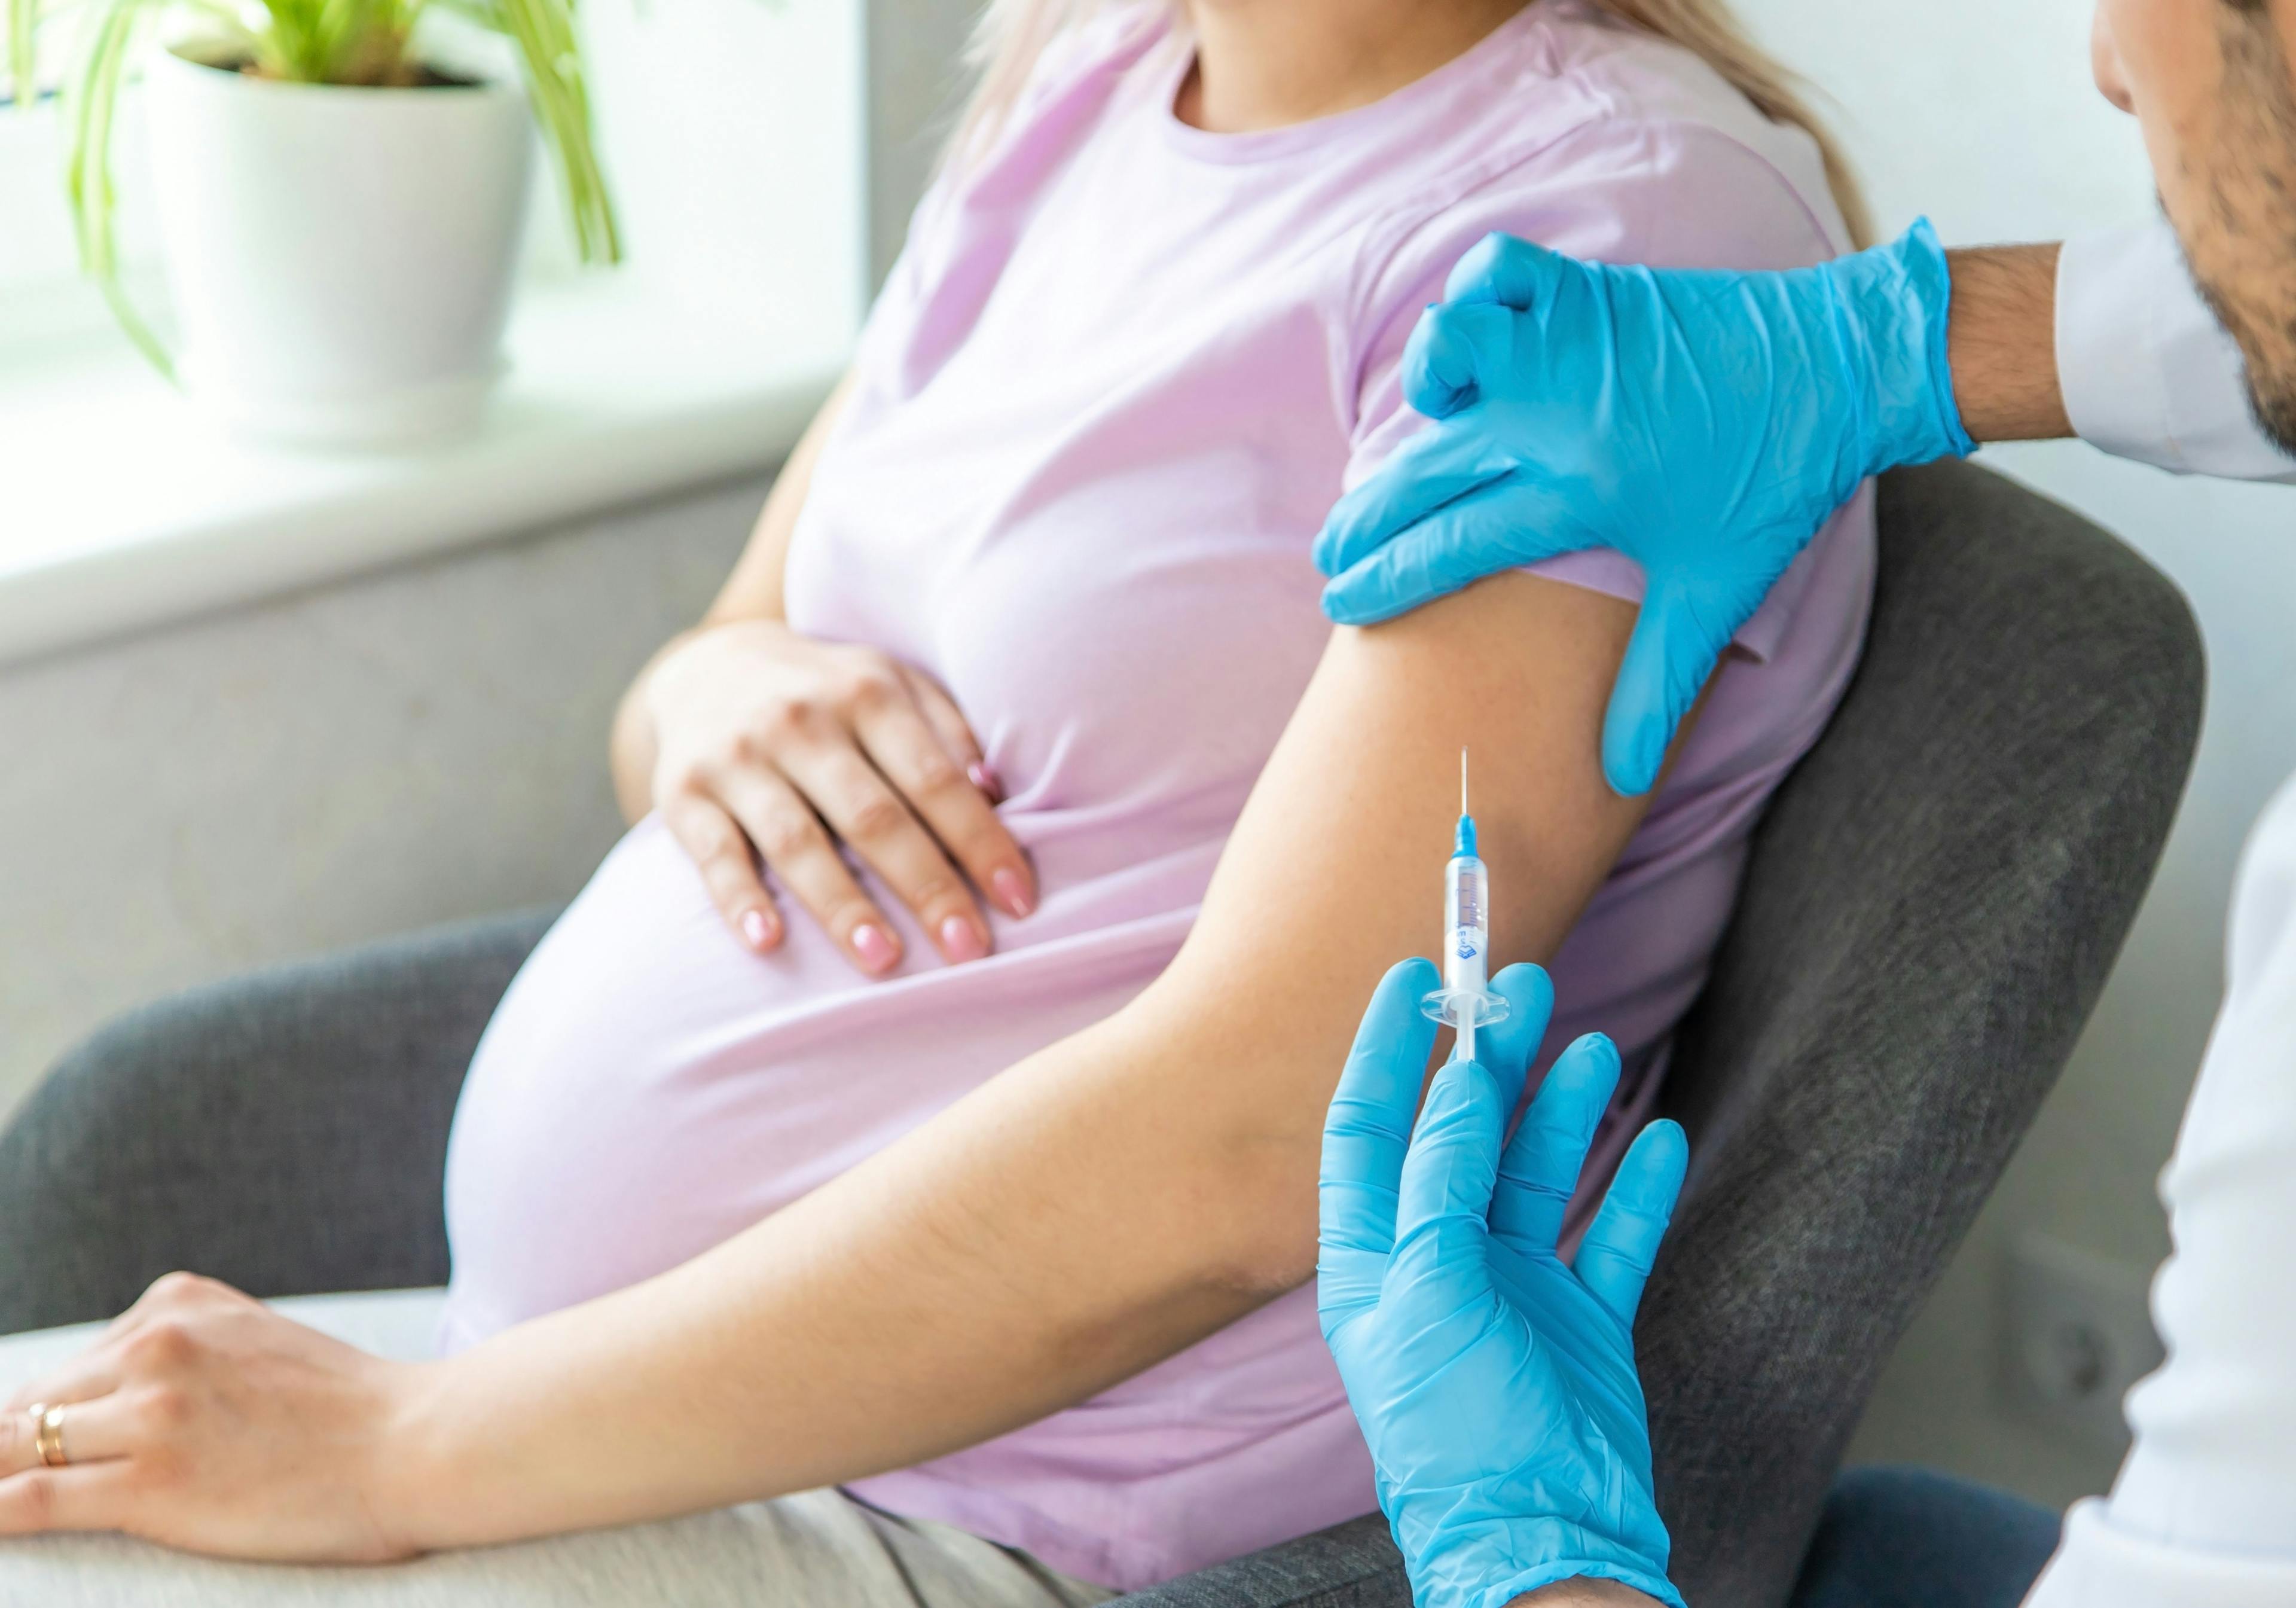 Study Finds No Link Between COVID-19 Vaccination, Preterm Birth